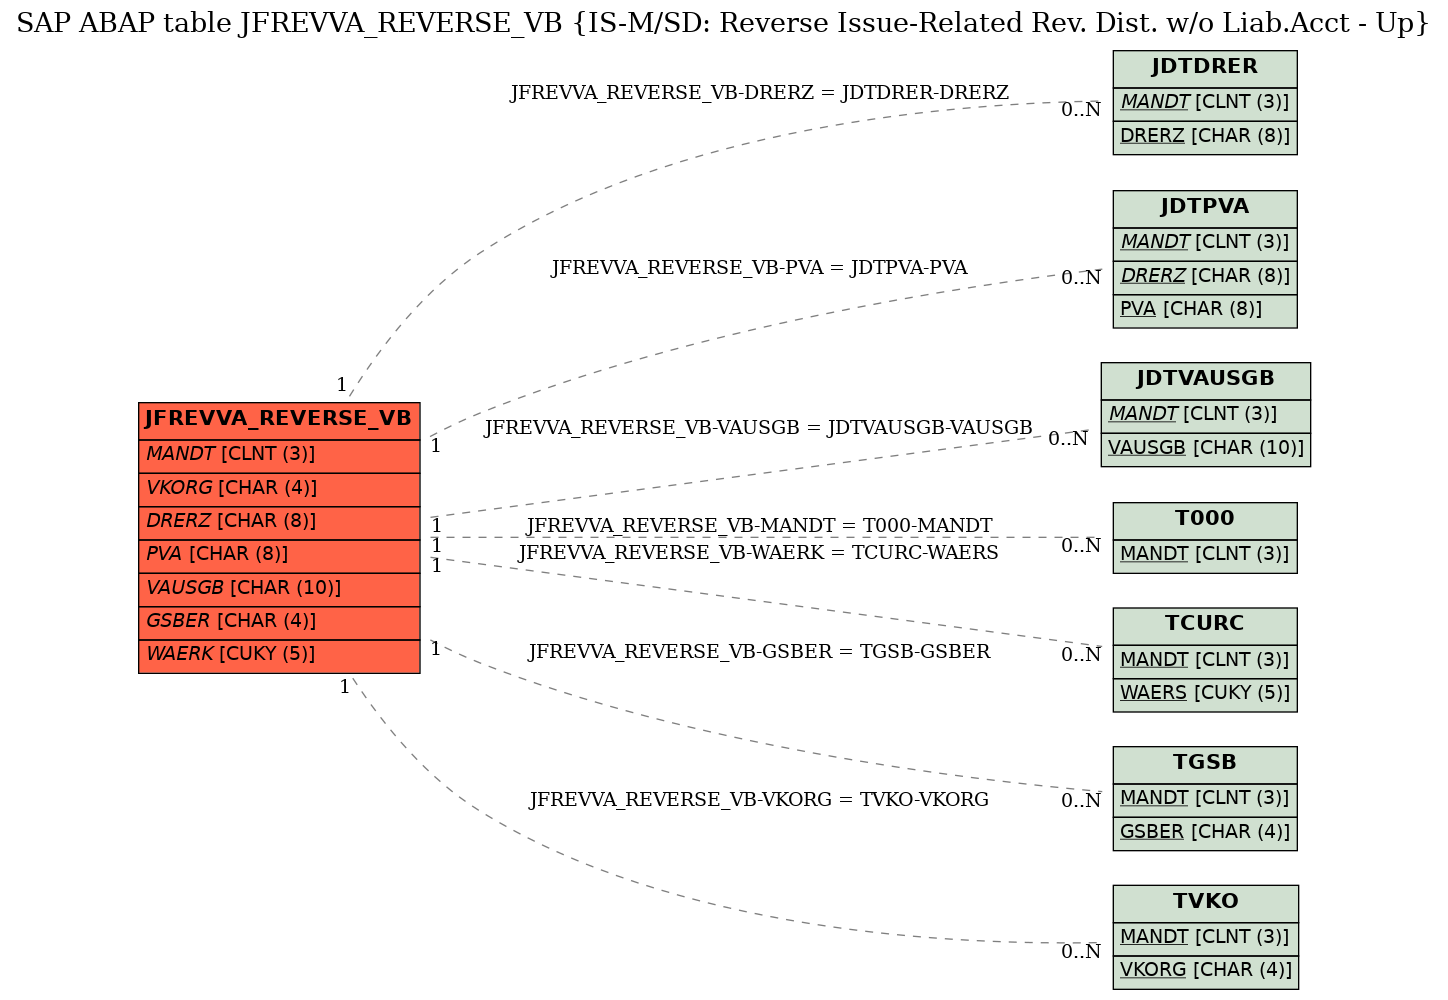 E-R Diagram for table JFREVVA_REVERSE_VB (IS-M/SD: Reverse Issue-Related Rev. Dist. w/o Liab.Acct - Up)